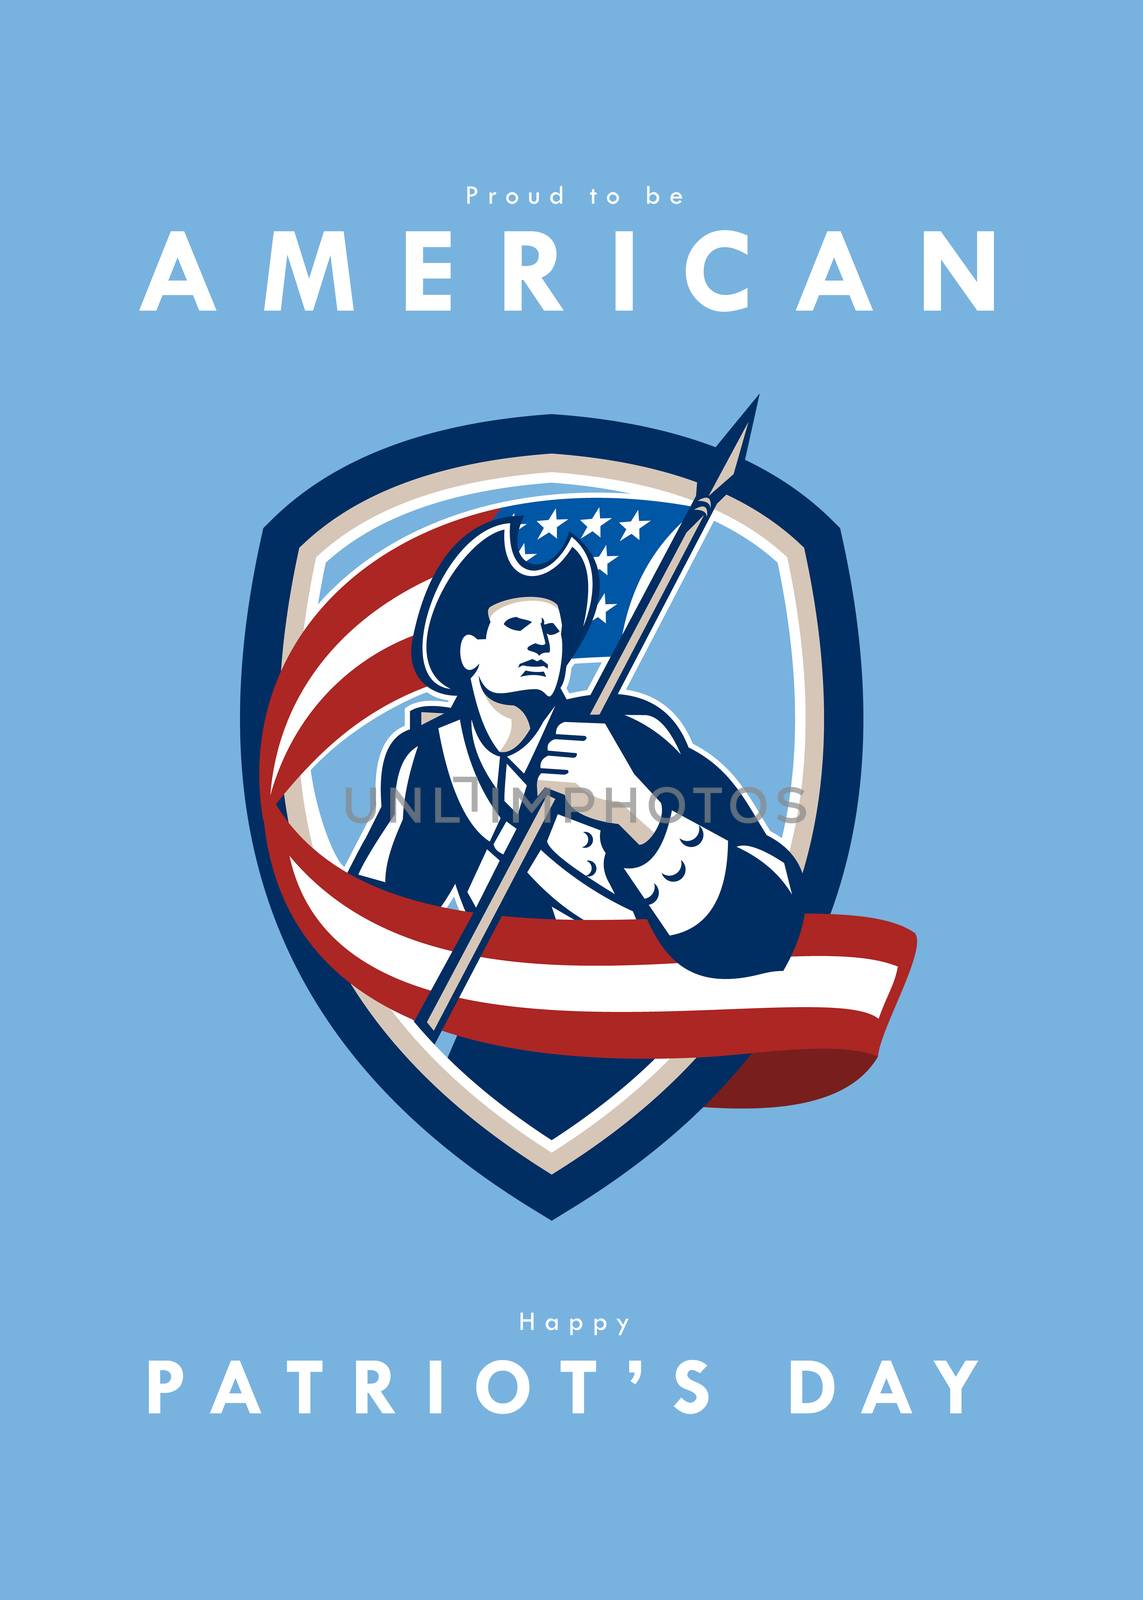 Patriots Day�greeting card featuring an illustration of an American Patriot revolutionary soldier waving USA stars and stripes flag looking to side set inside shield crest shape done in retro style with the words Proud to be American, Happy Patriot's Day